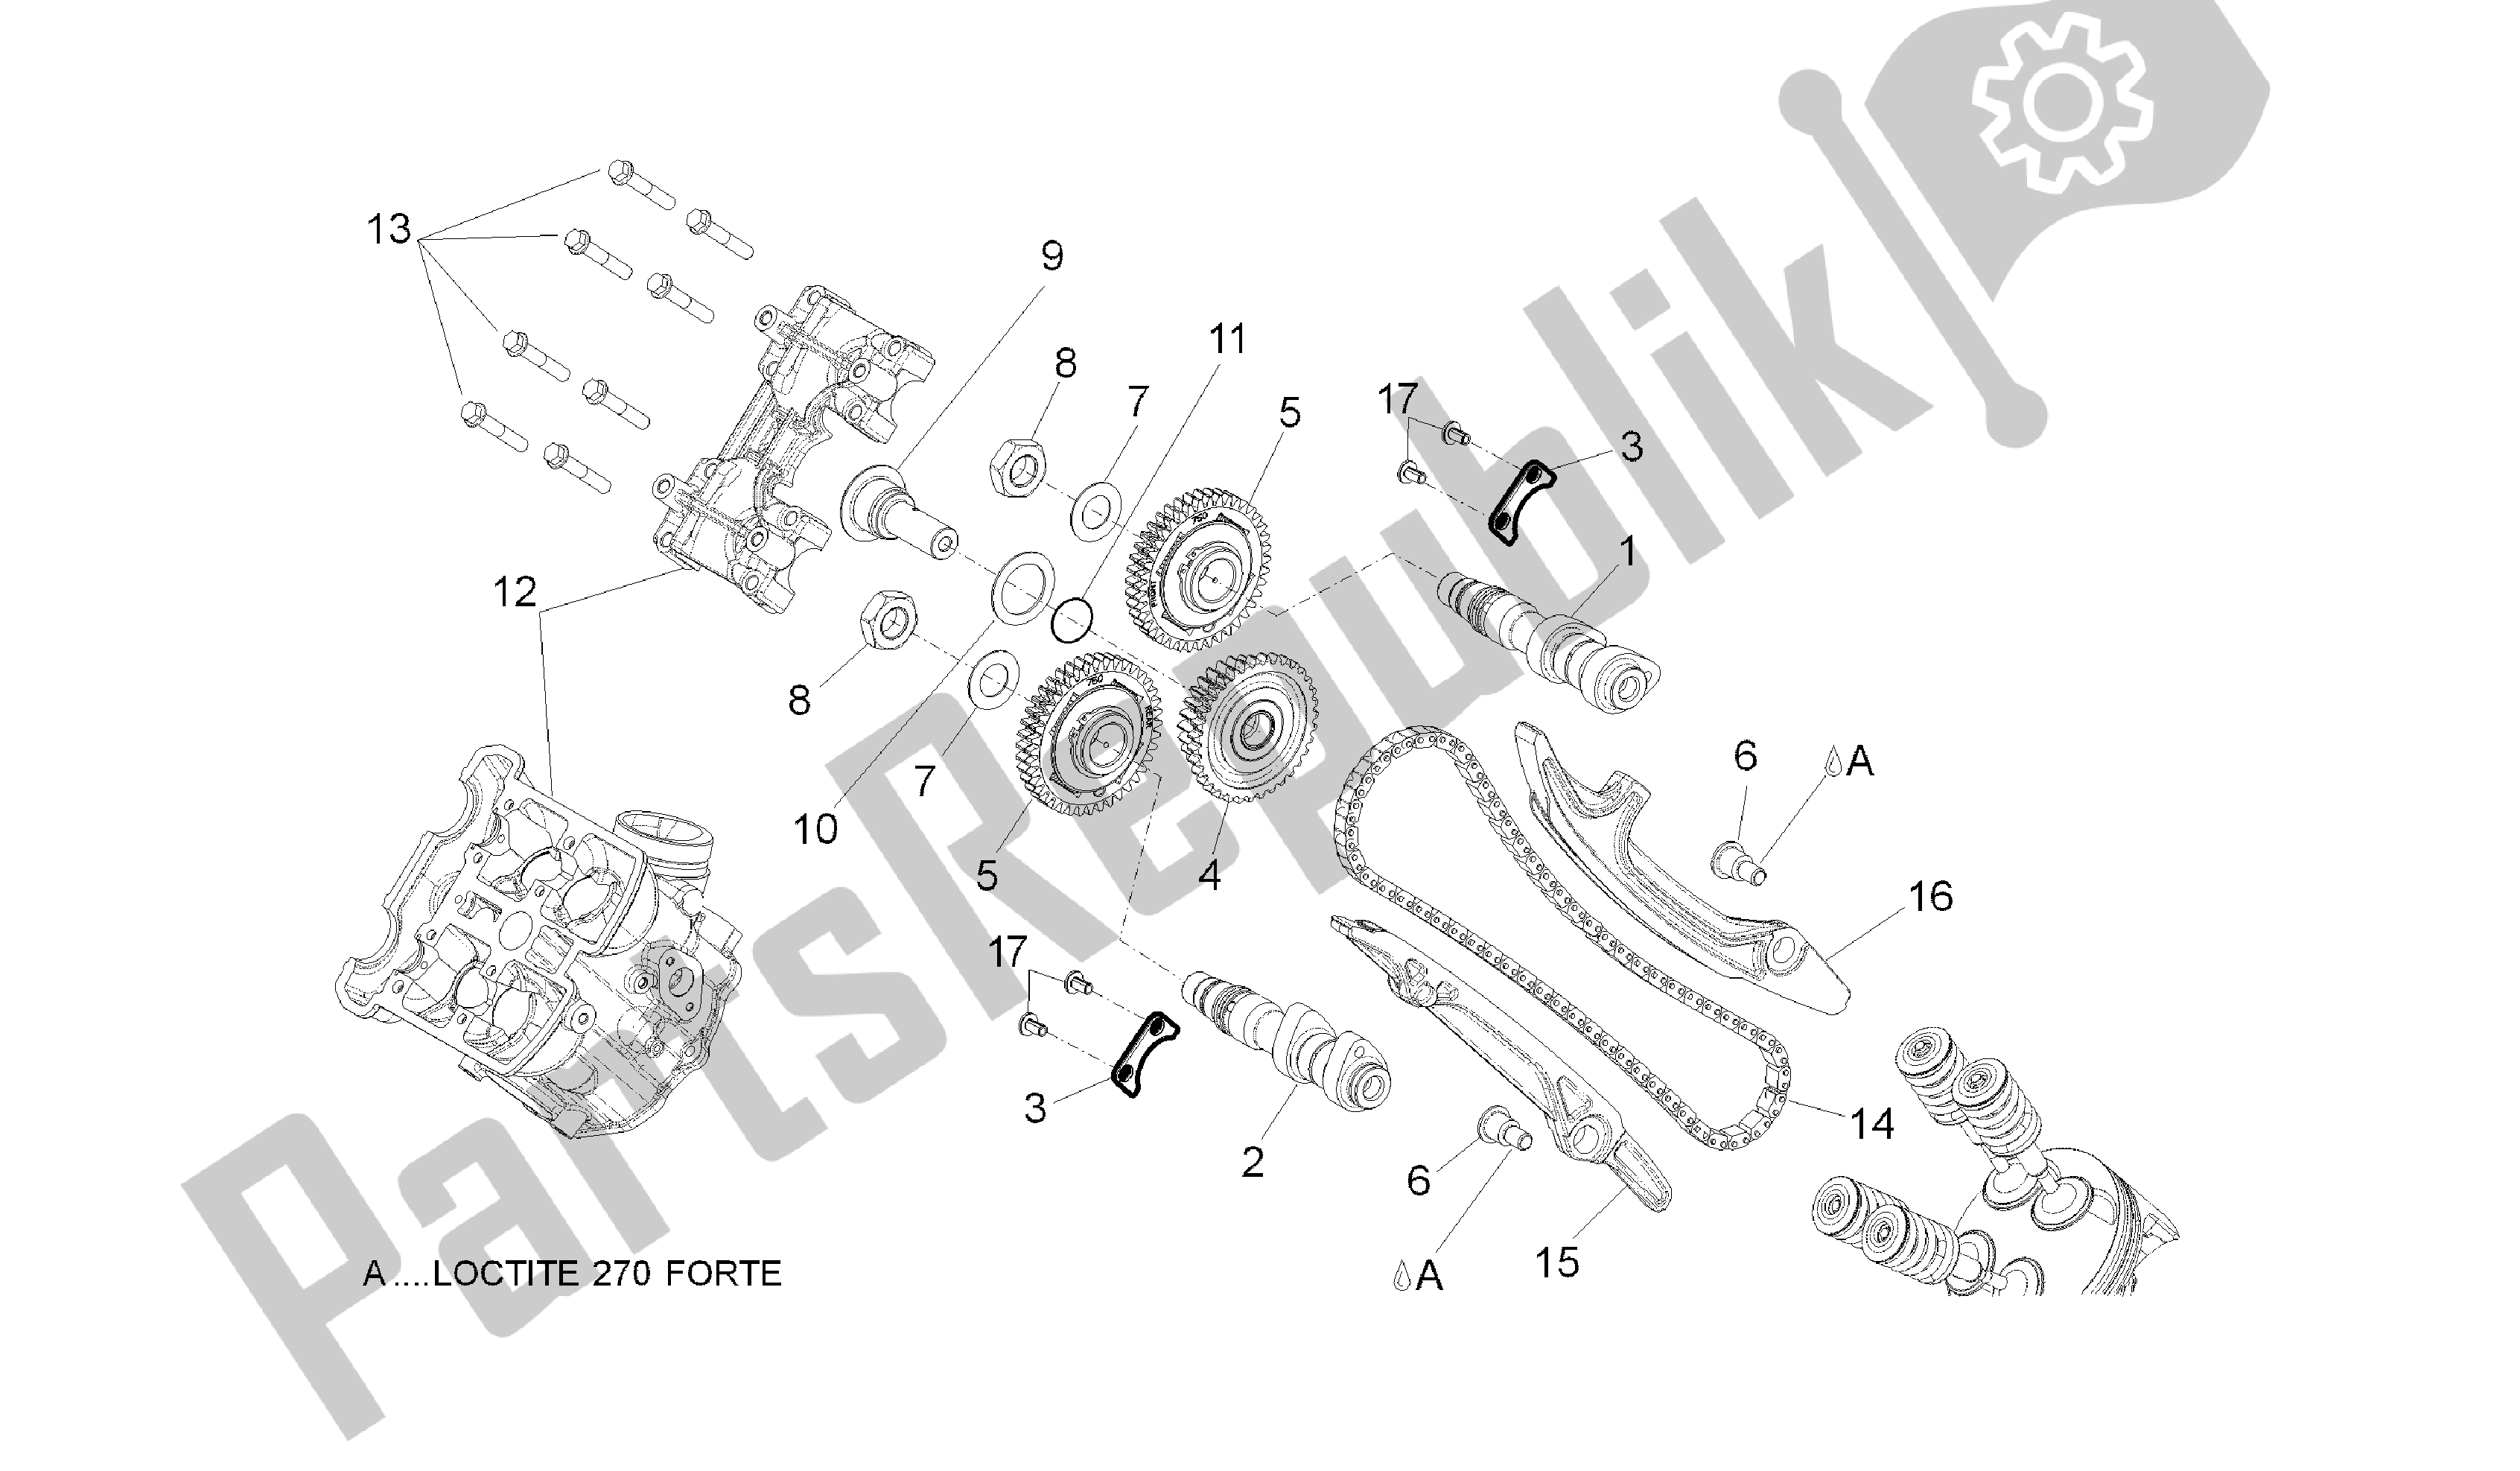 All parts for the Front Cylinder Timing System of the Aprilia Shiver 750 2010 - 2013